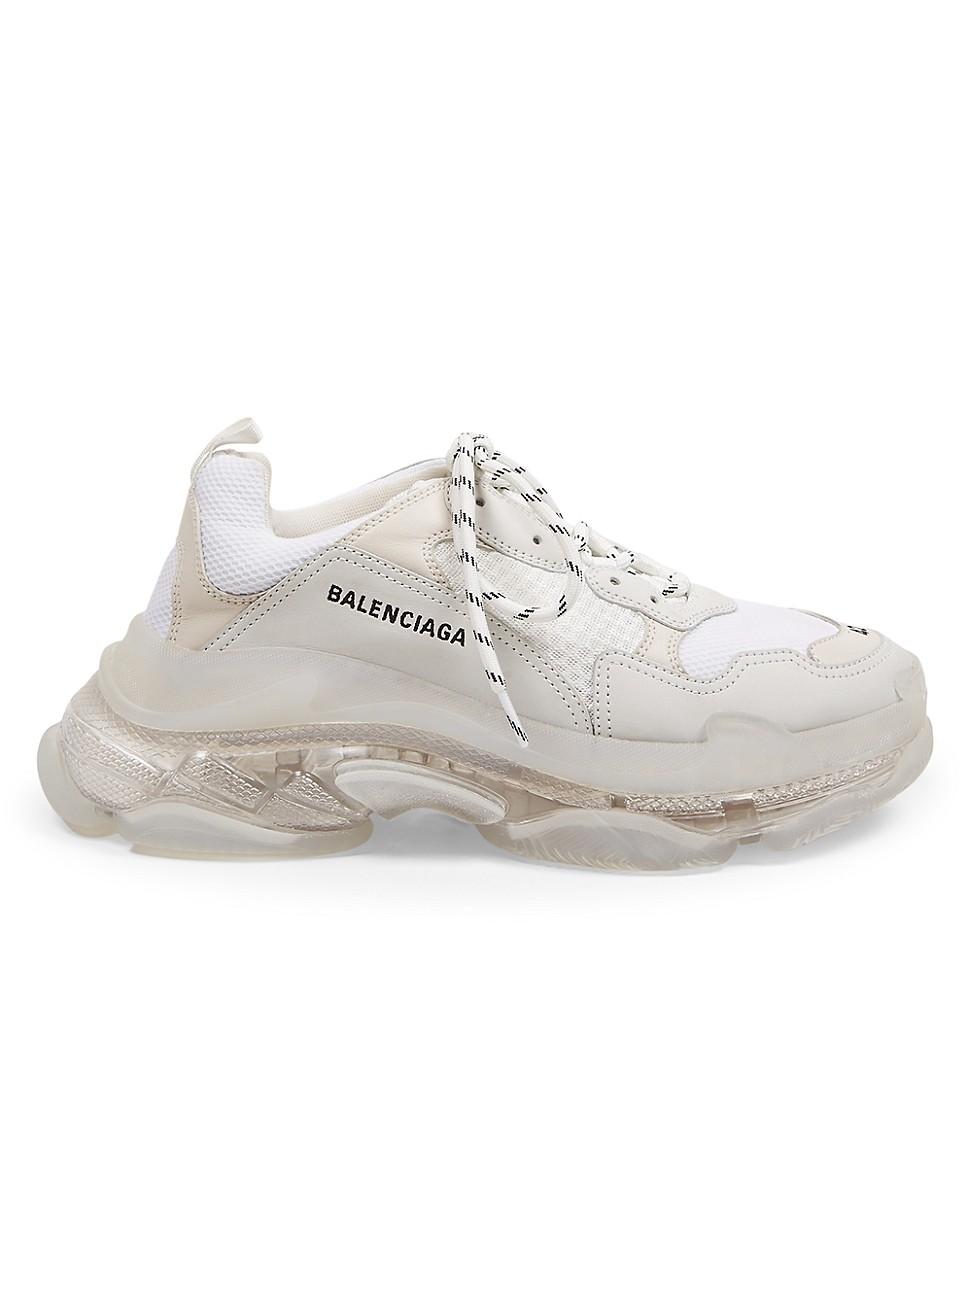 Balenciaga Synthetic Triple S Clear Sole Sneaker in Beige (White) for Men -  Save 39% - Lyst